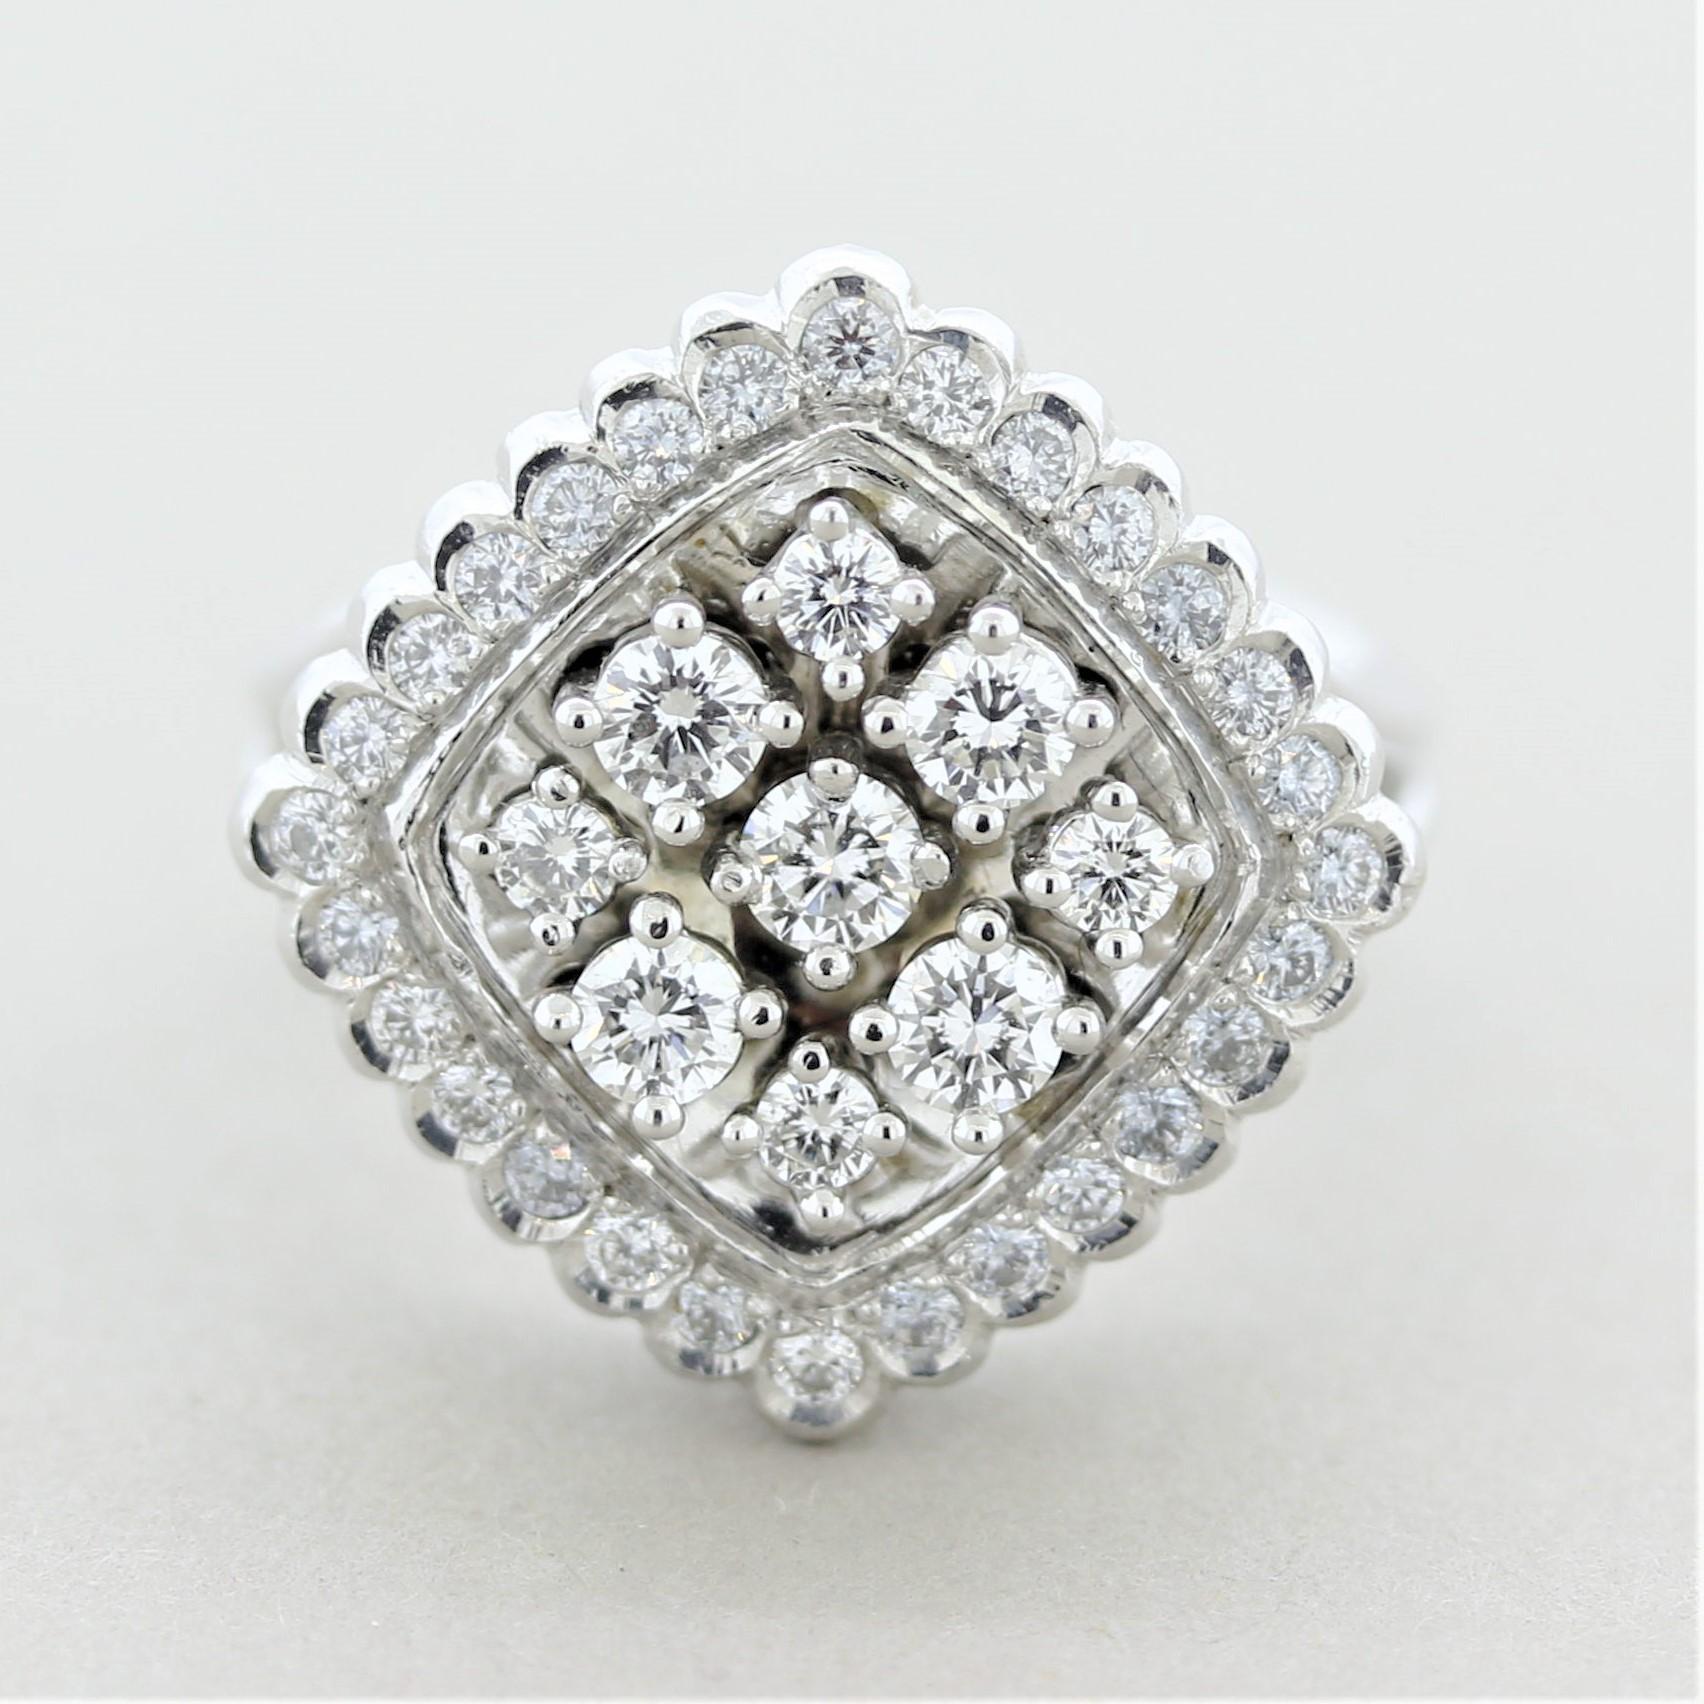 A modern and stylish ring featuring 1.17 carats of round brilliant-cut diamonds. The larger diamonds are cluster-set in the center of the ring with smaller rounds set around them. Hand-fabricated in platinum and ready to be worn, day or night.

Ring